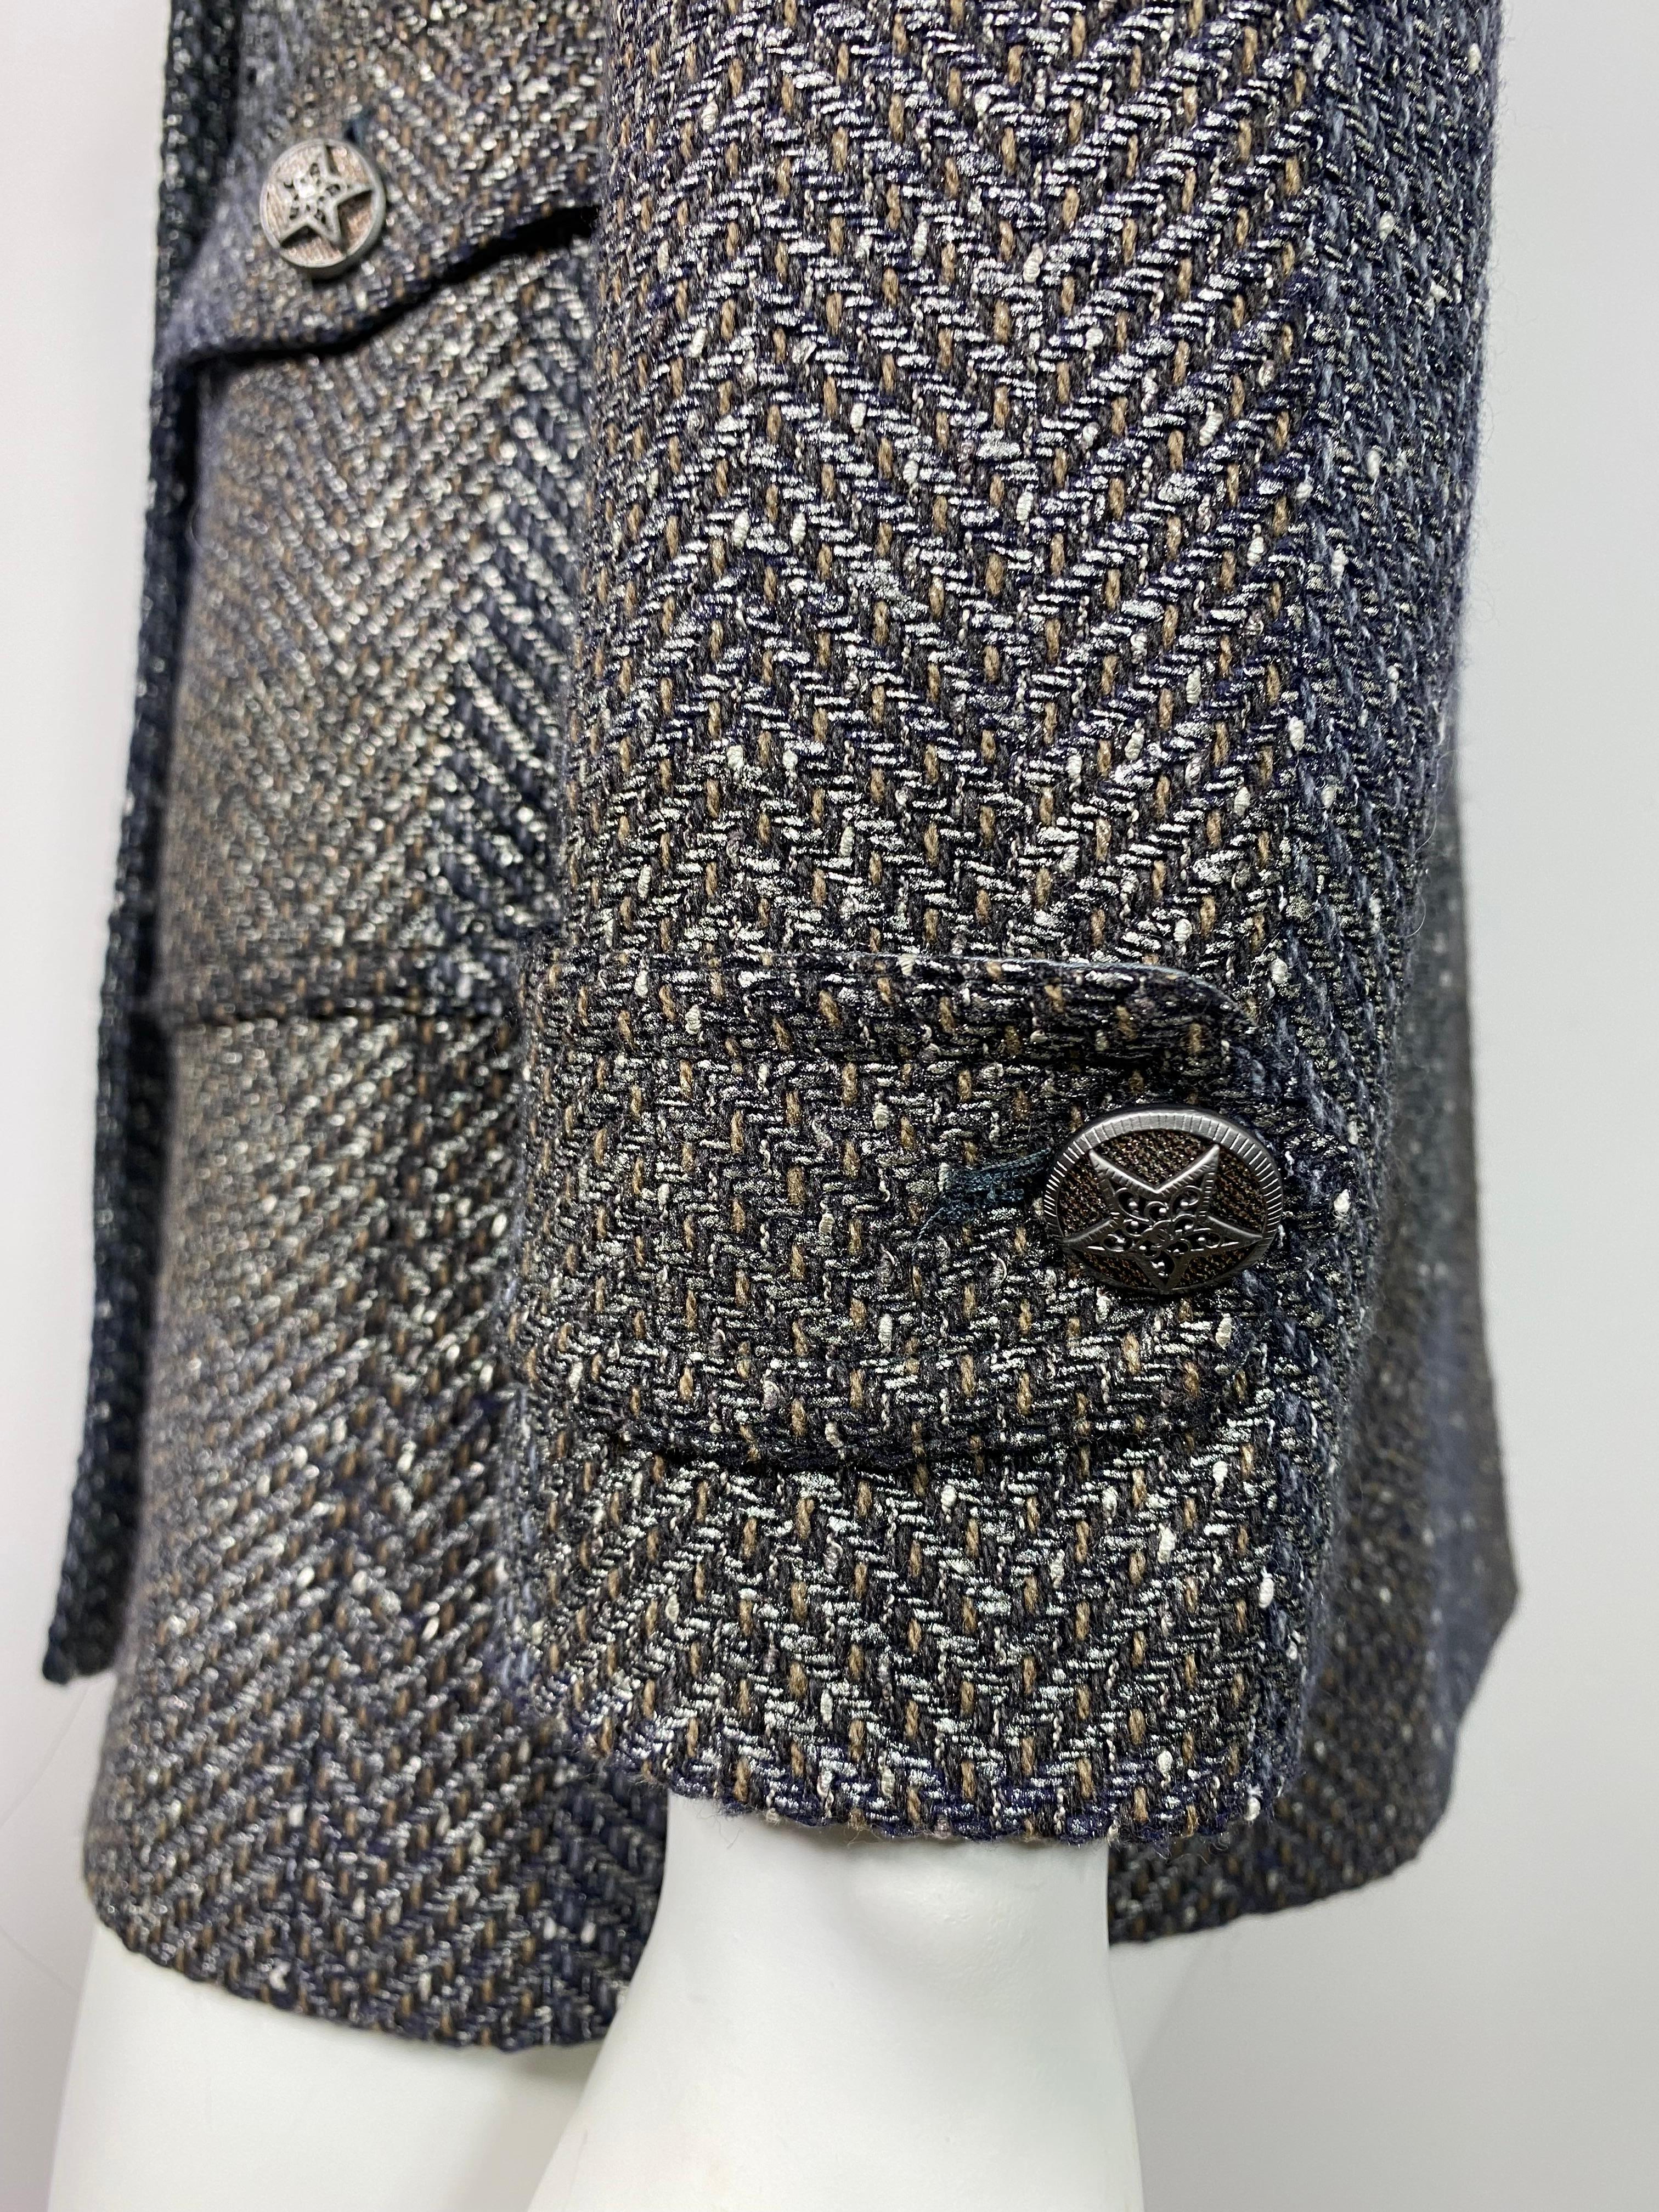 Chanel Fall 2007 Grey and Metallic Double Breasted Jacket - Size 34 For Sale 5